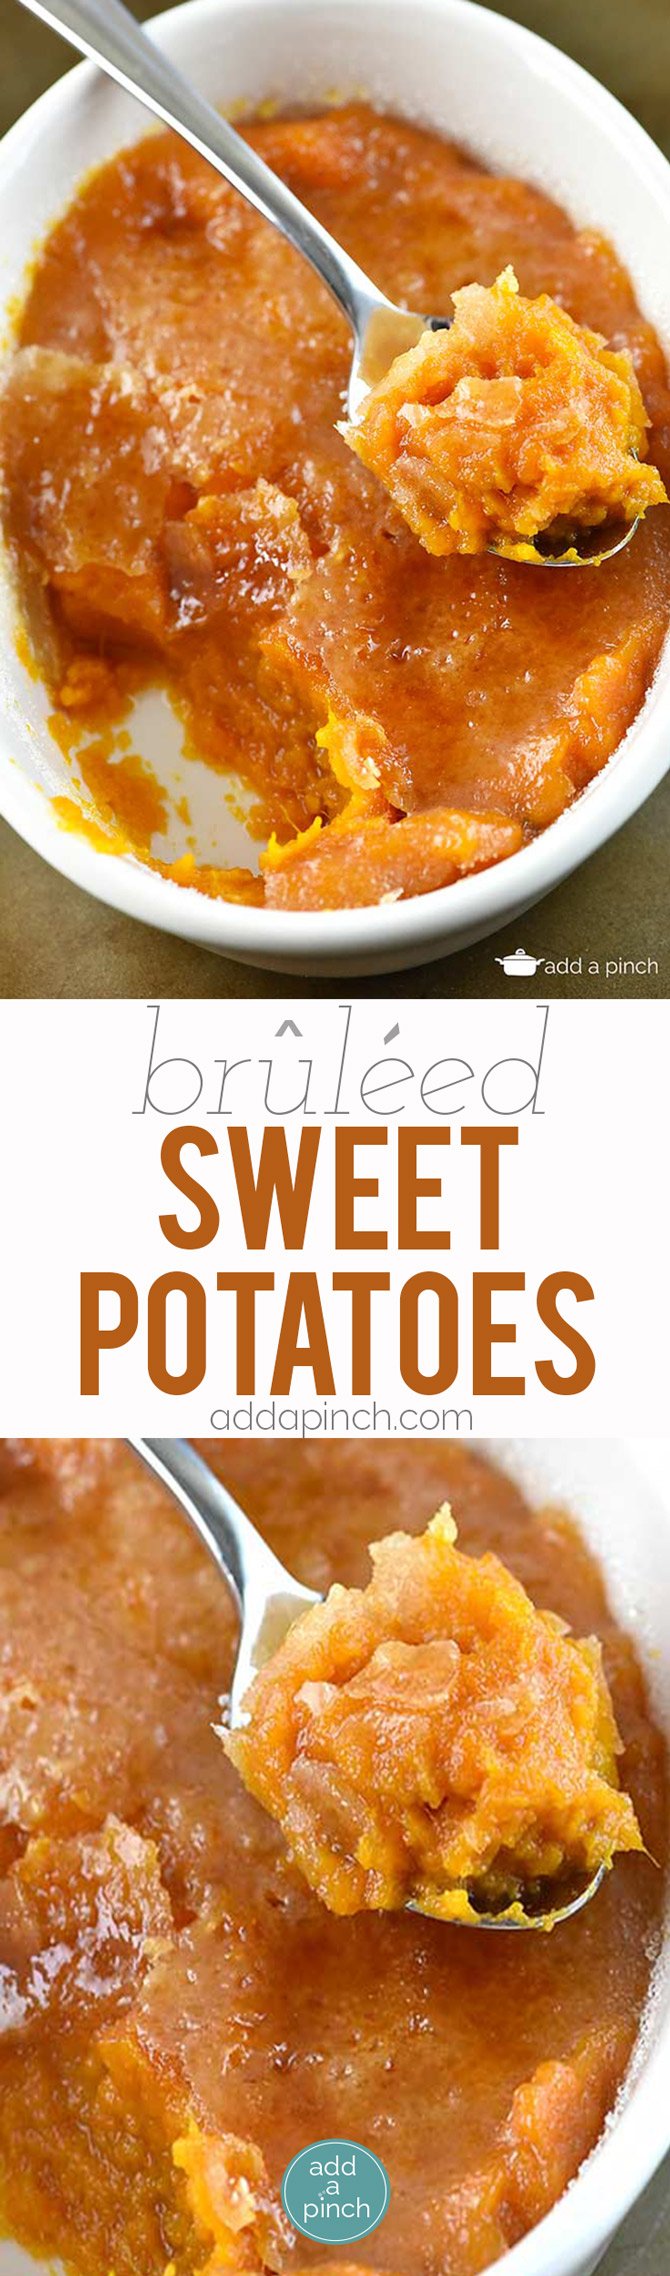 Bruleed Sweet Potatoes Recipe - This bruleed sweet potatoes recipe makes a delicious dessert. Creamy, flavorful sweet potatoes encased in a crunchy topping. // addapinch.com